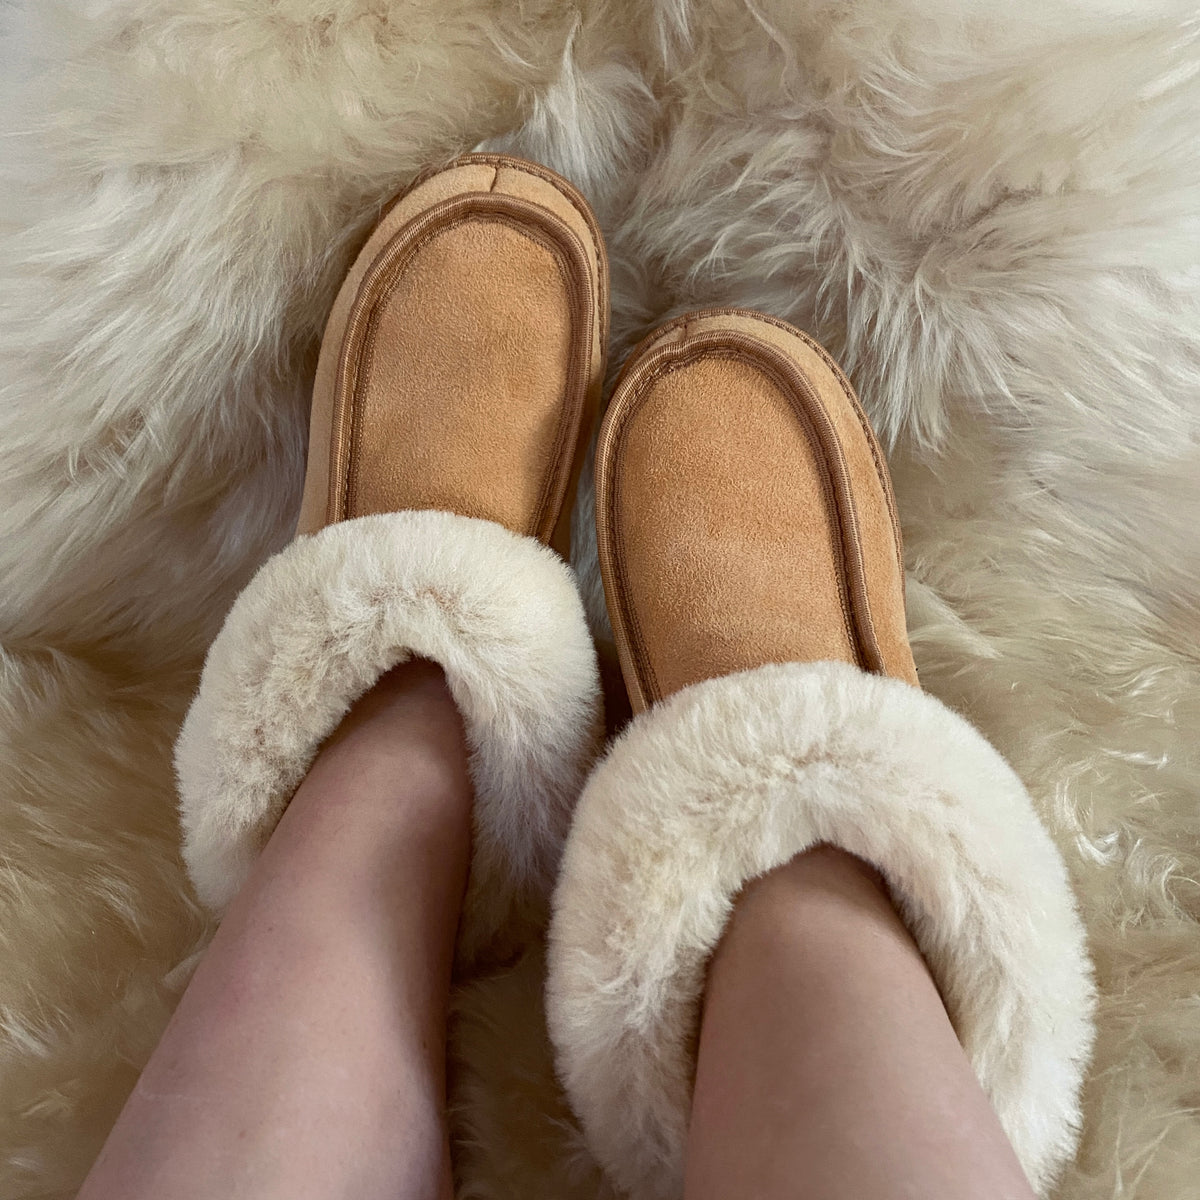 8 Cute Outfits to Wear With Your Cozy House Slippers | POPSUGAR Fashion